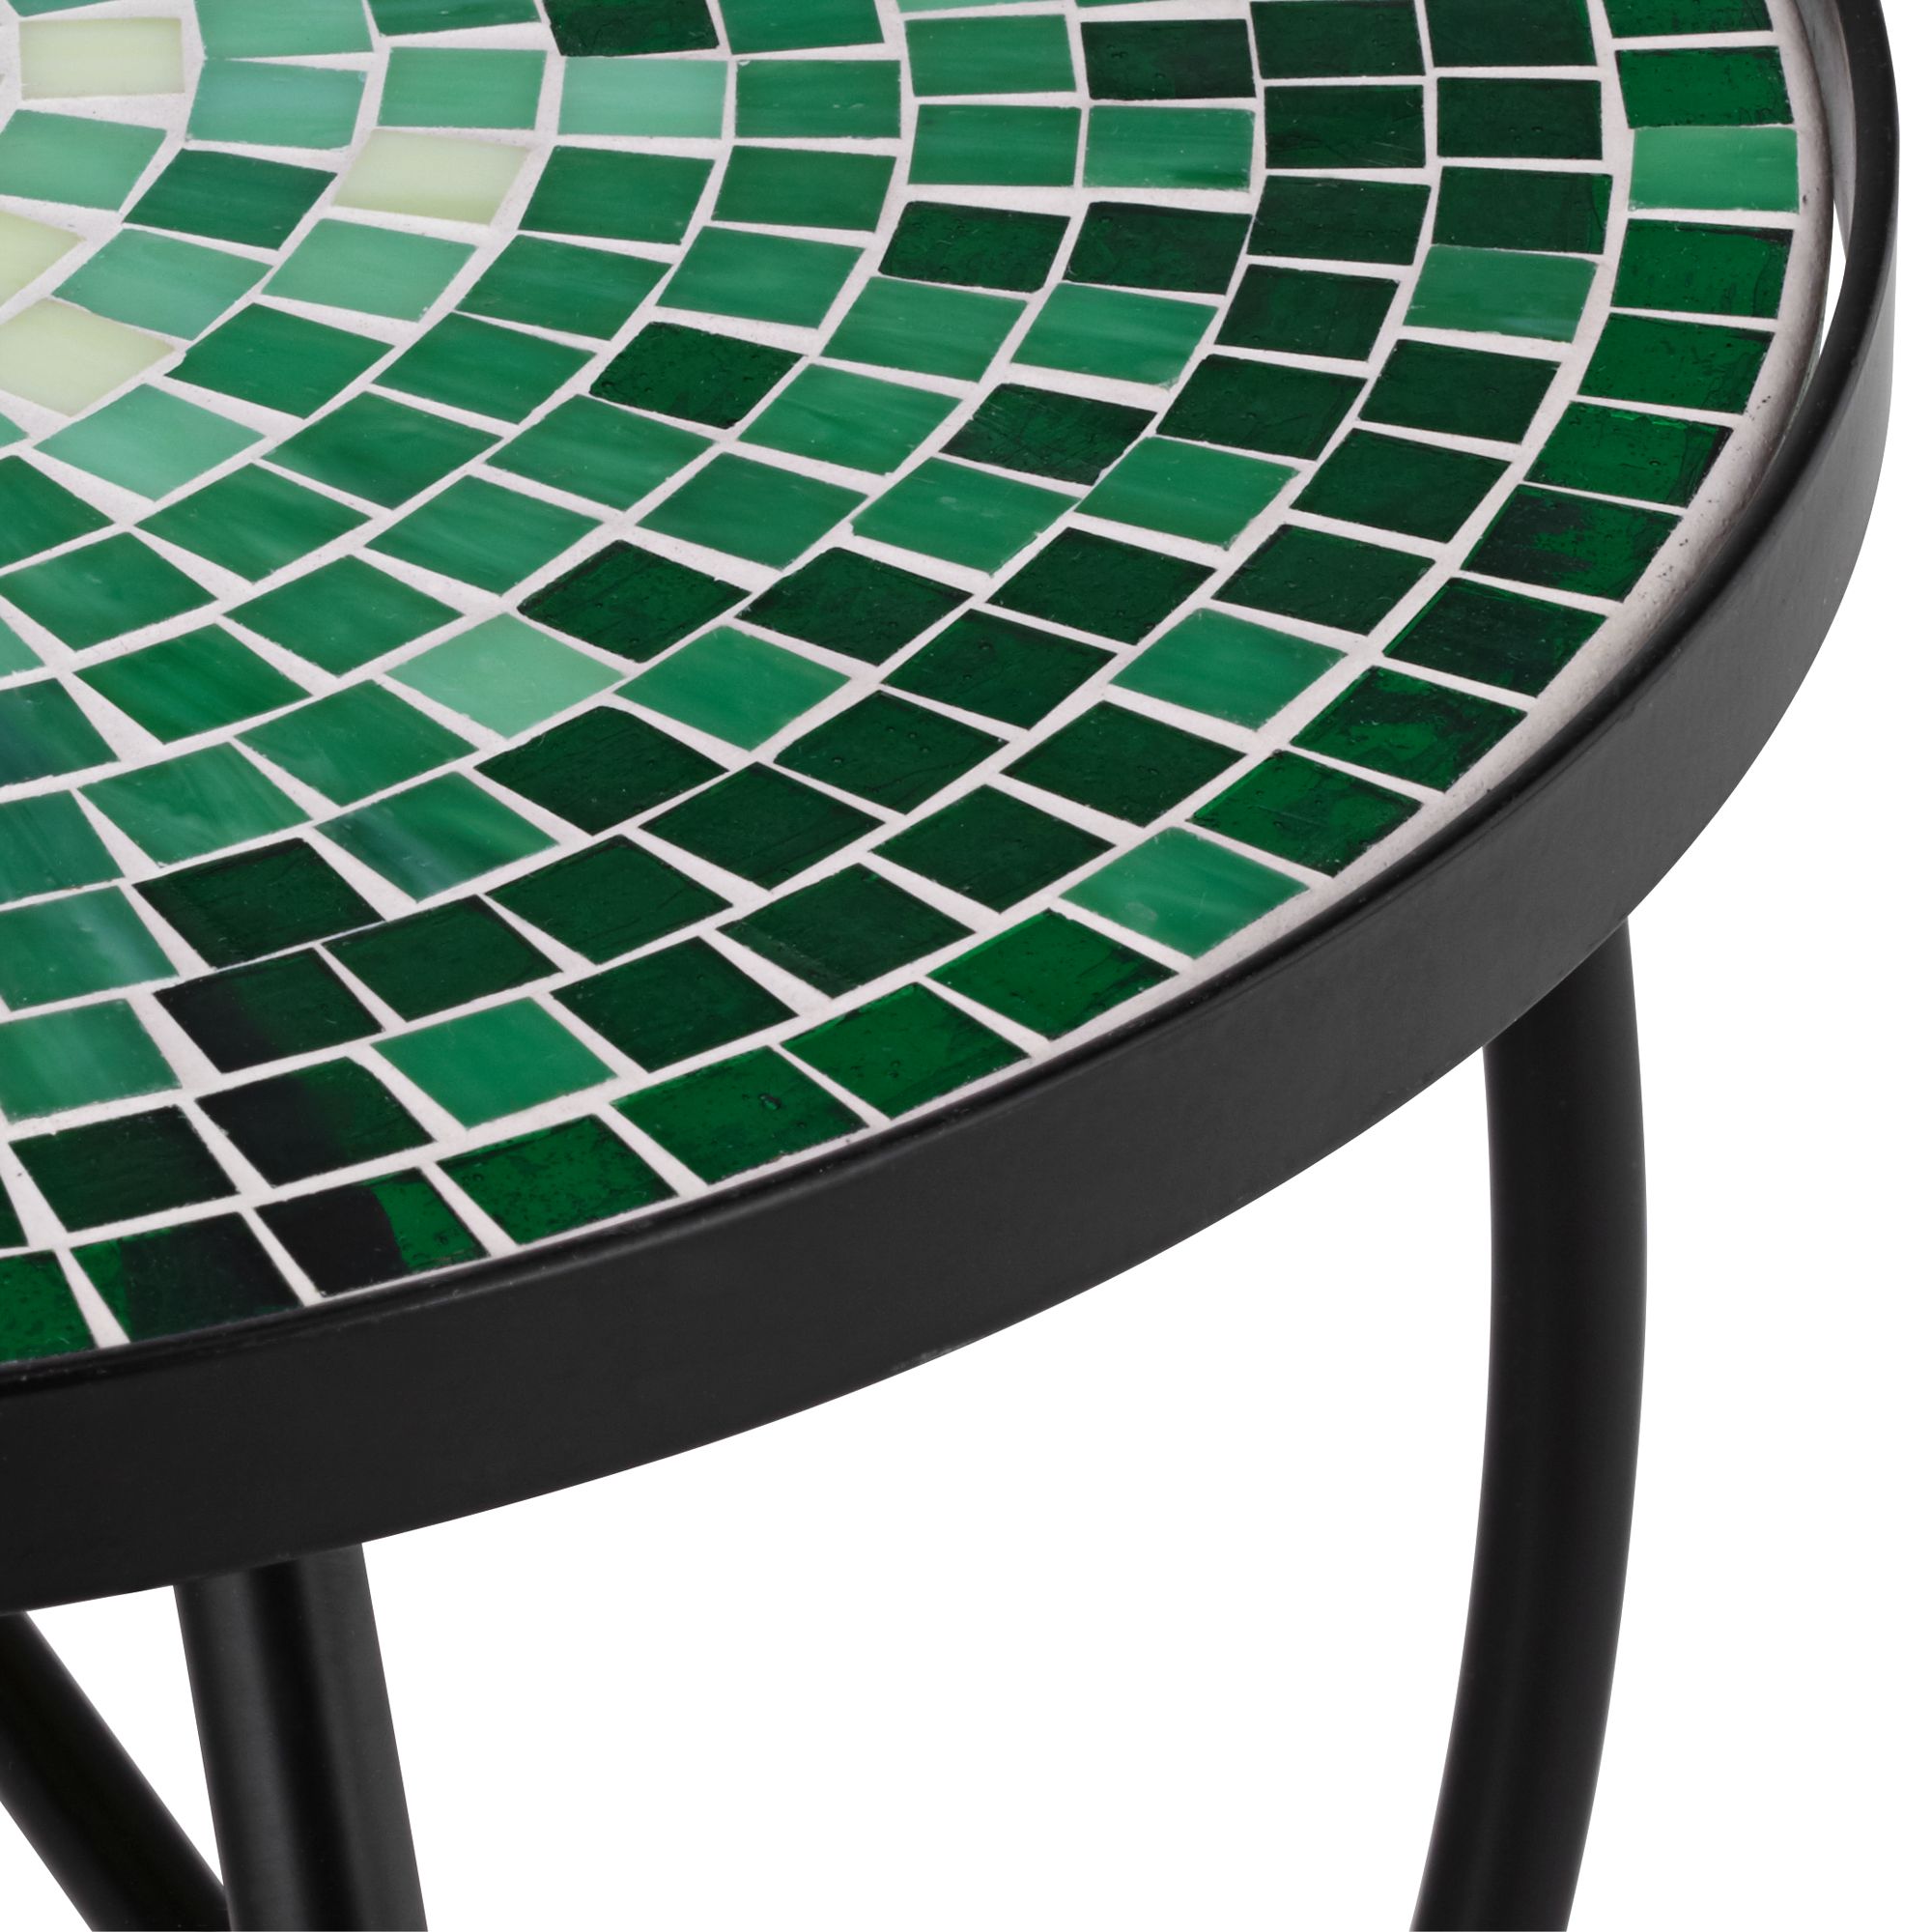 Teal Island Designs Modern Black Round Outdoor Accent Side Table 14" Wide Green Mosaic Front Porch Patio House Balcony Deck Shed - image 3 of 7